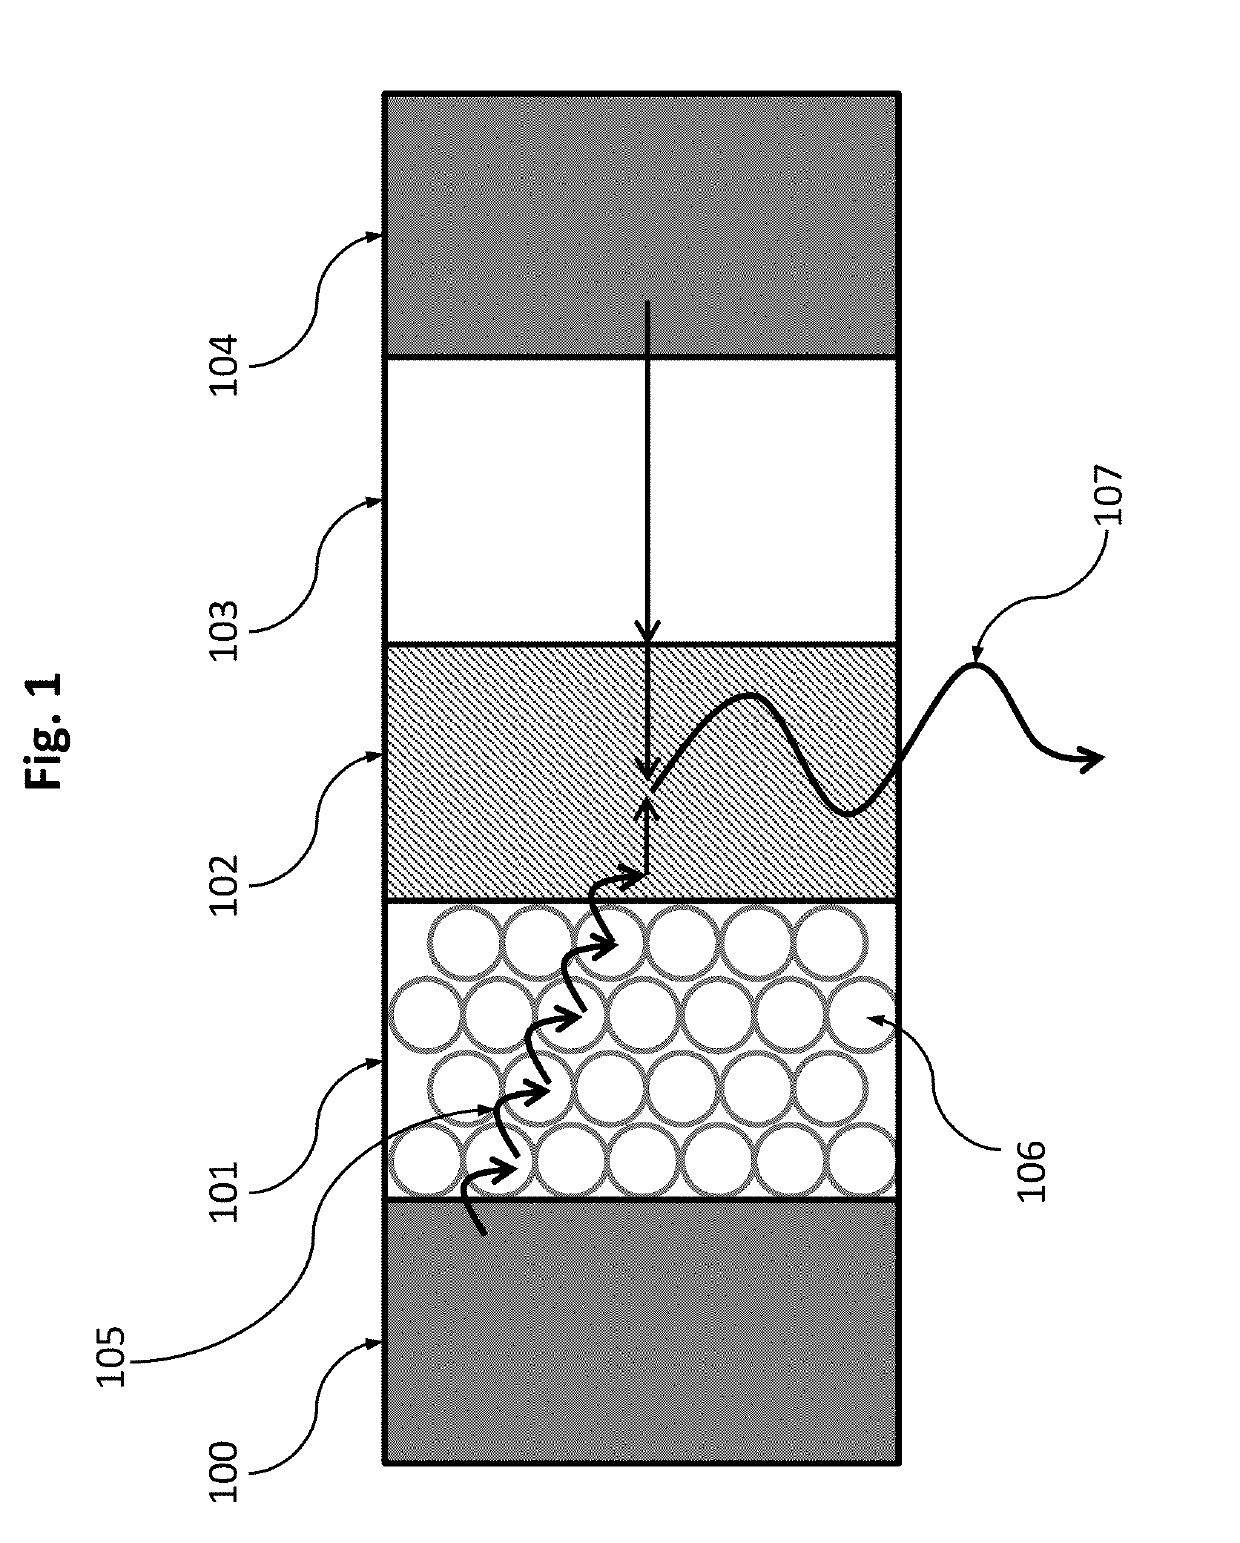 Light-emitting device with mixed nanoparticle charge transport layer